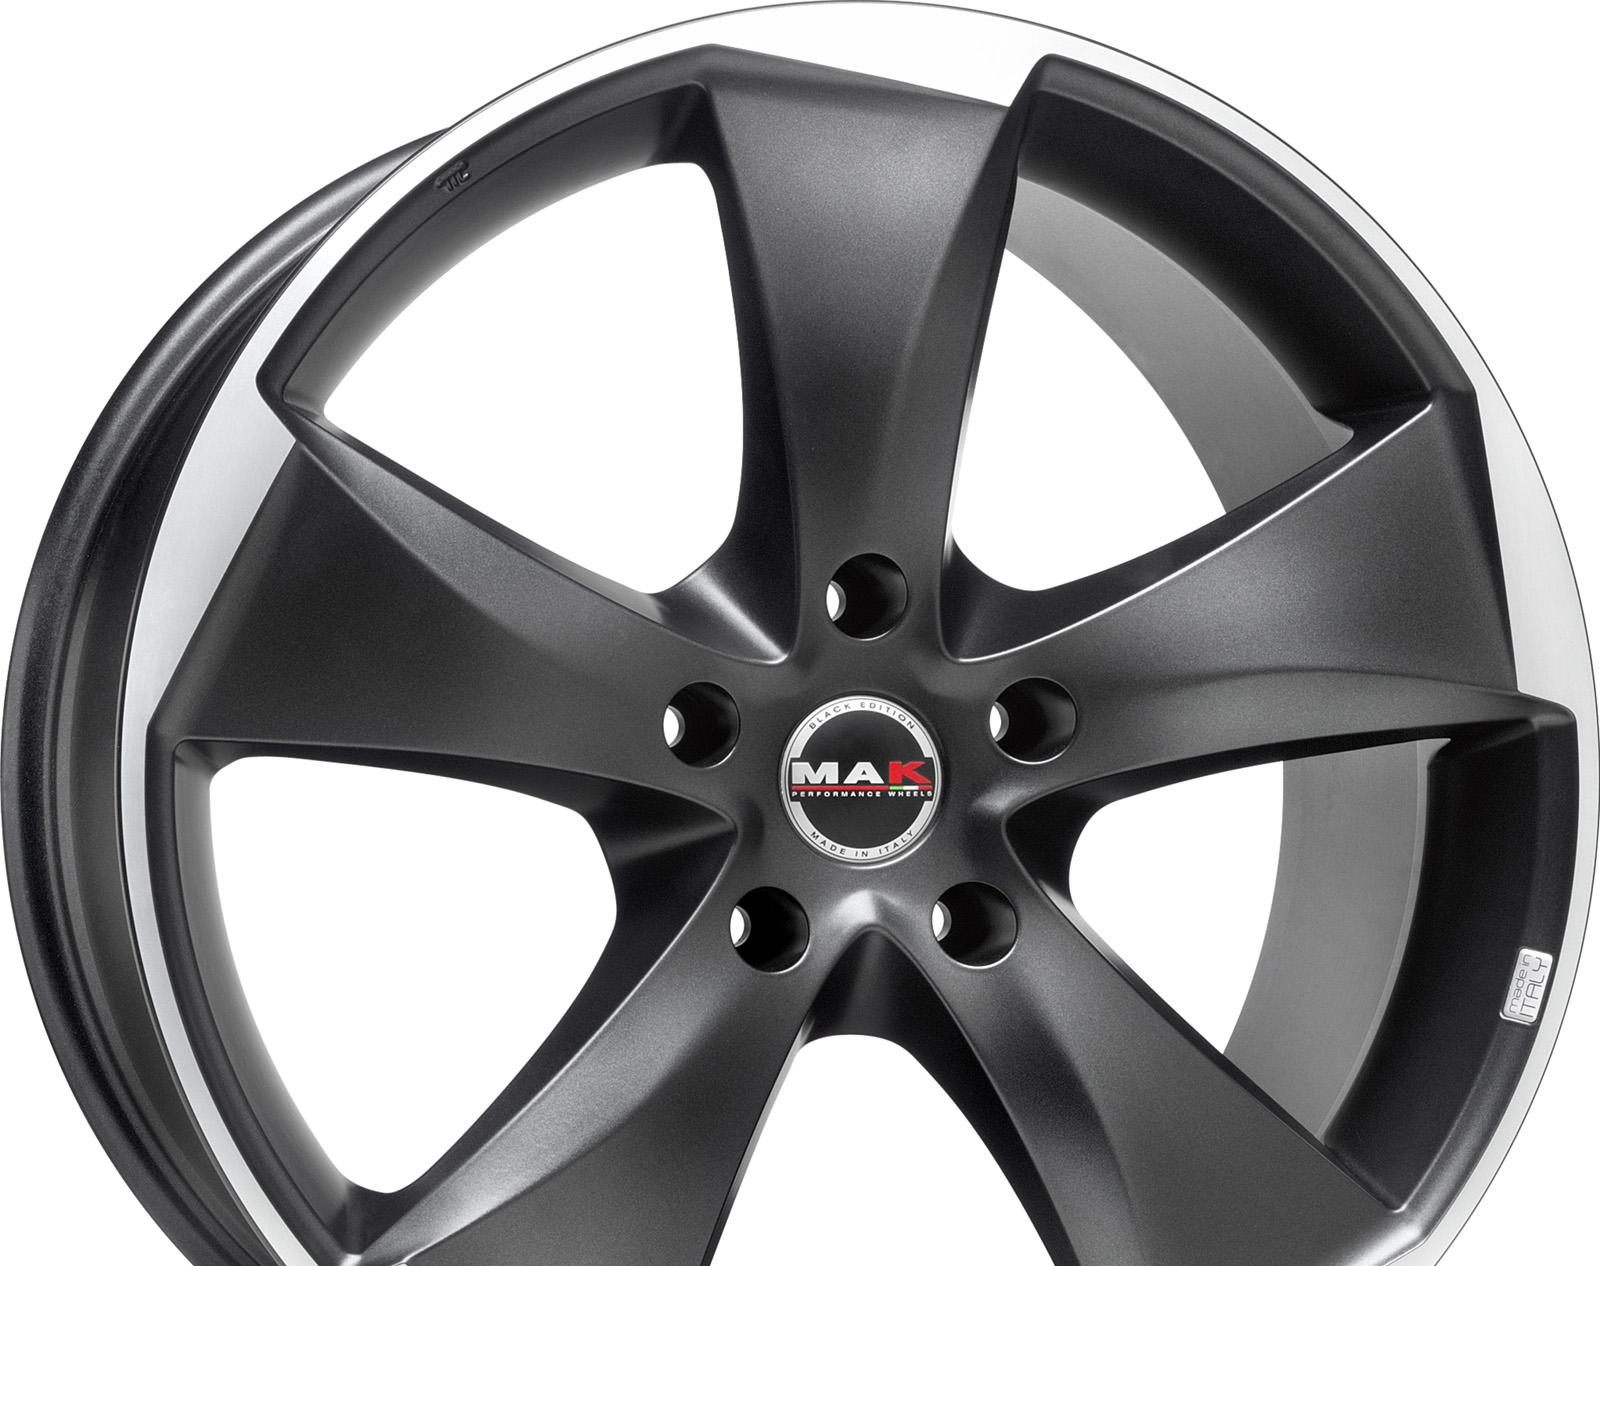 Wheel Mak Raptor 5 Hyper Silver 20x9.5inches/5x150mm - picture, photo, image